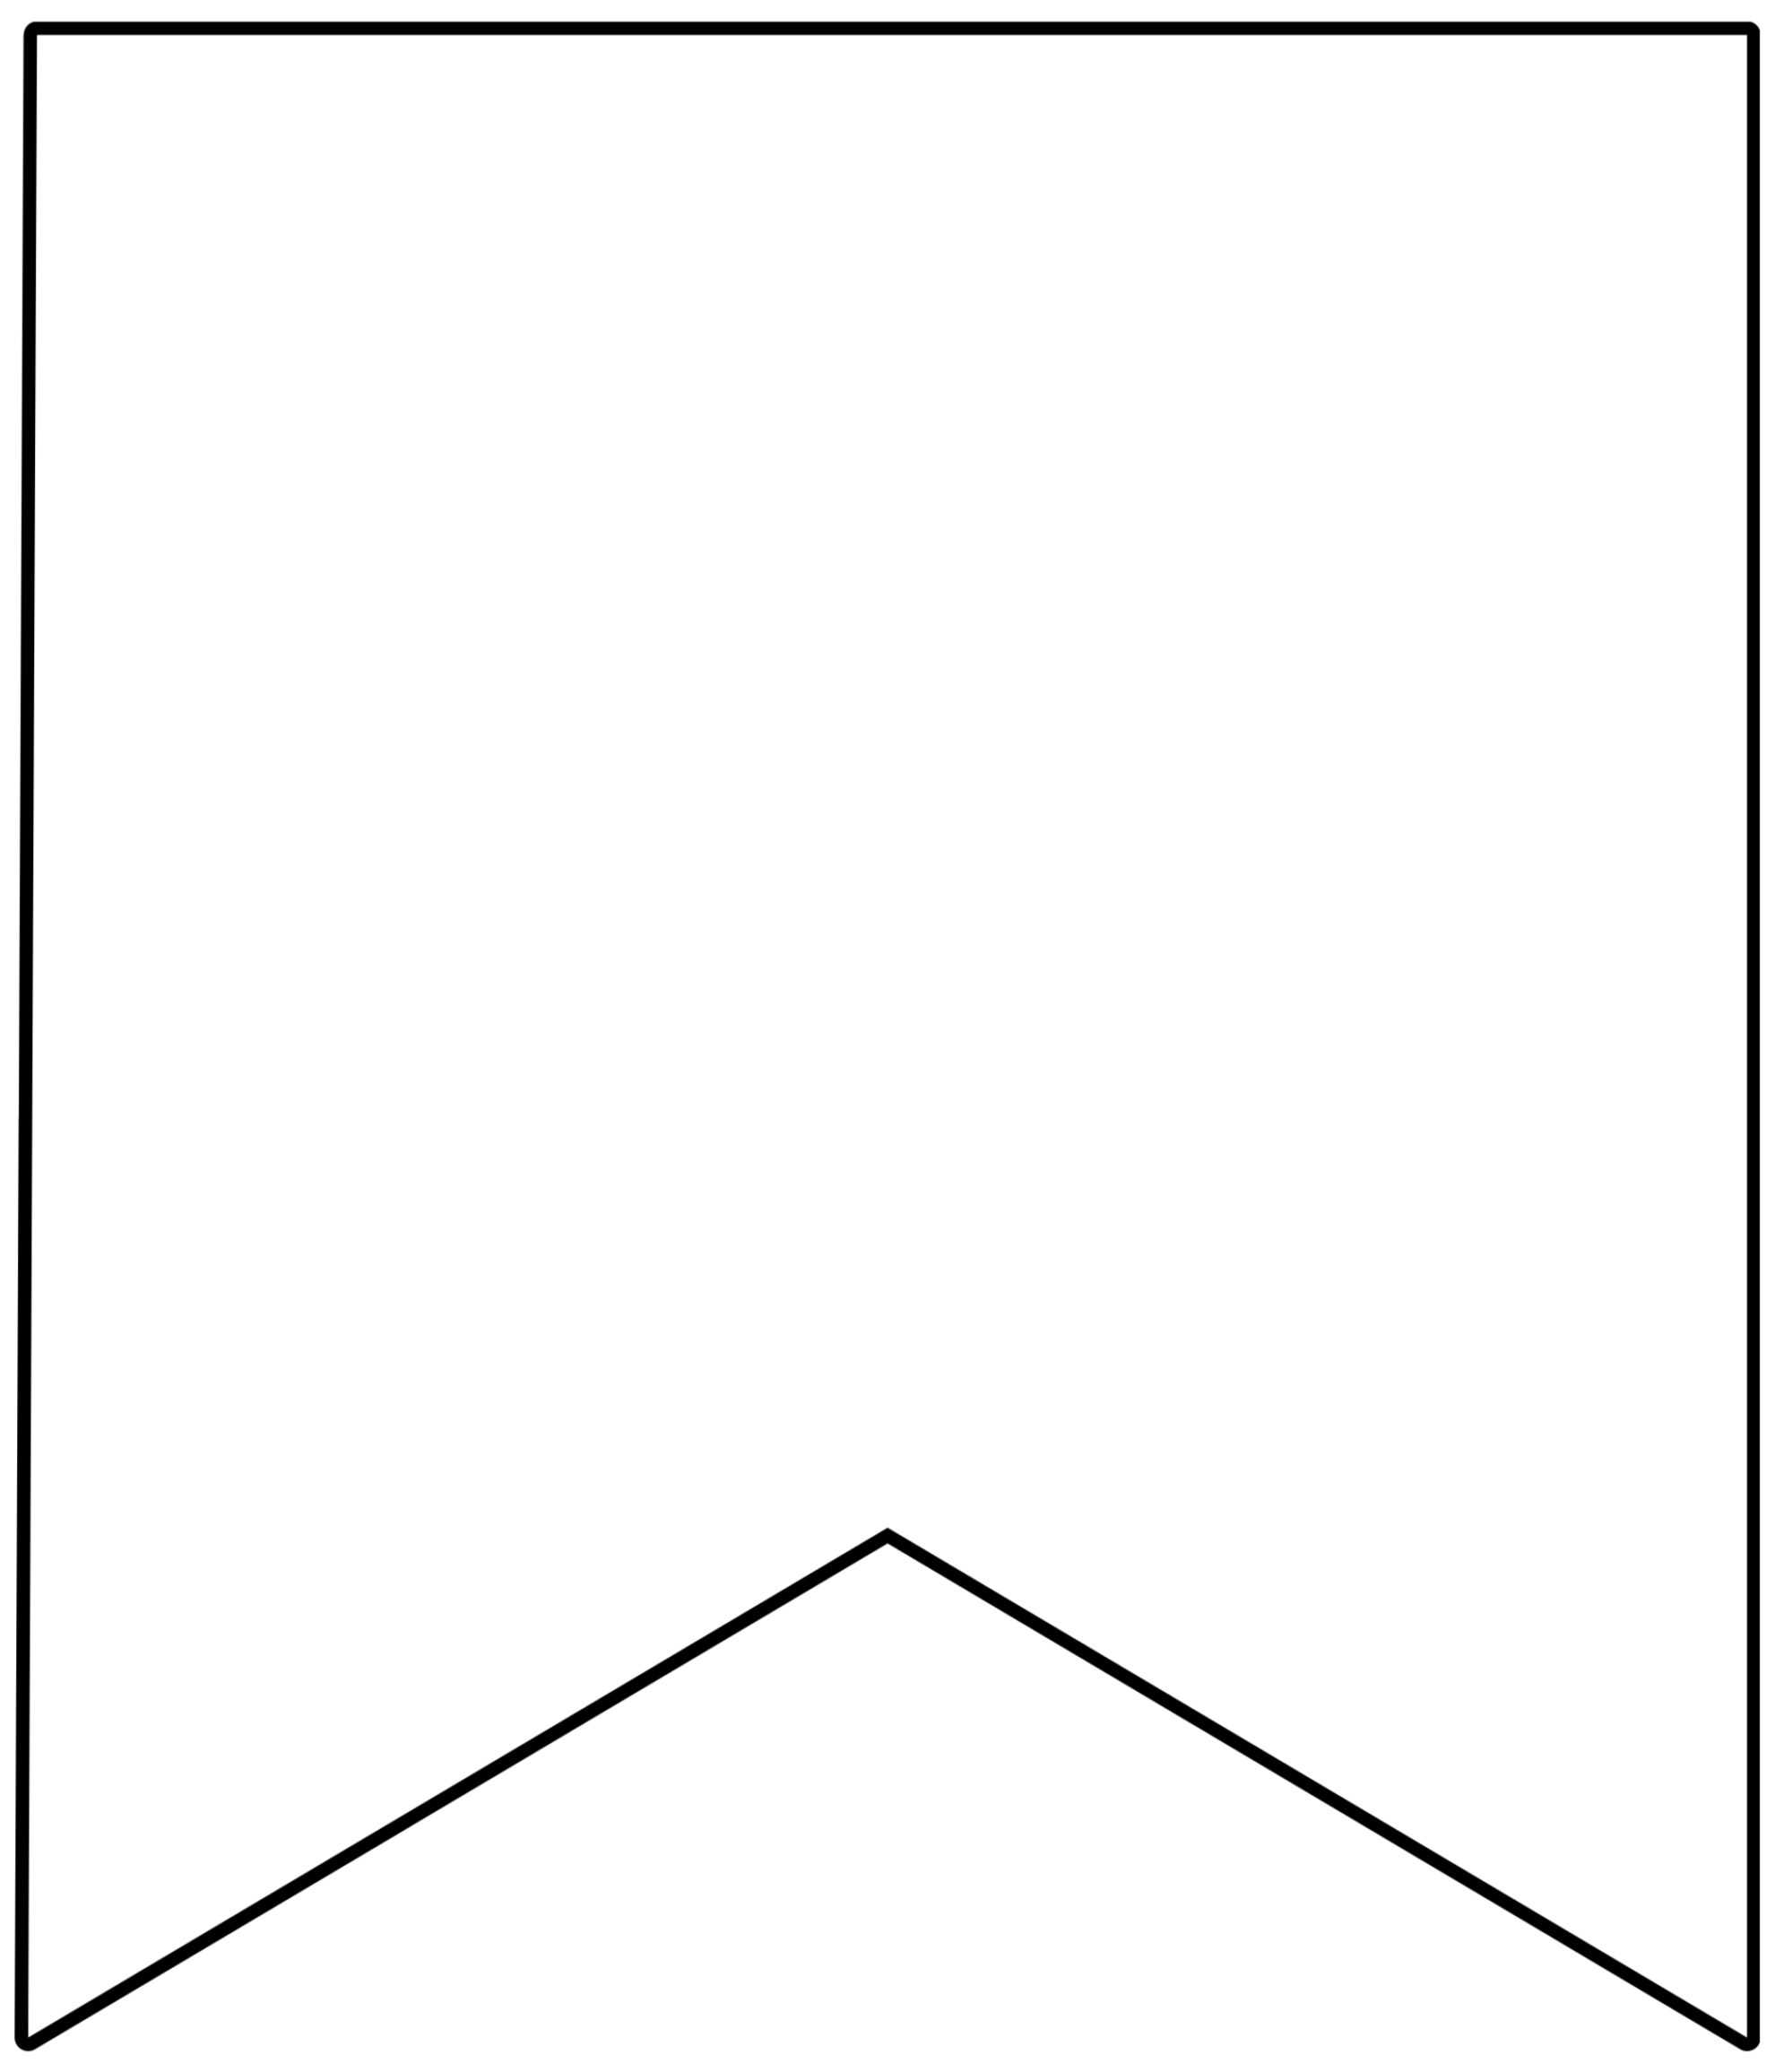 Free Printable Banner Templates {Blank Banners} - Paper Pertaining To Free Triangle Banner Template